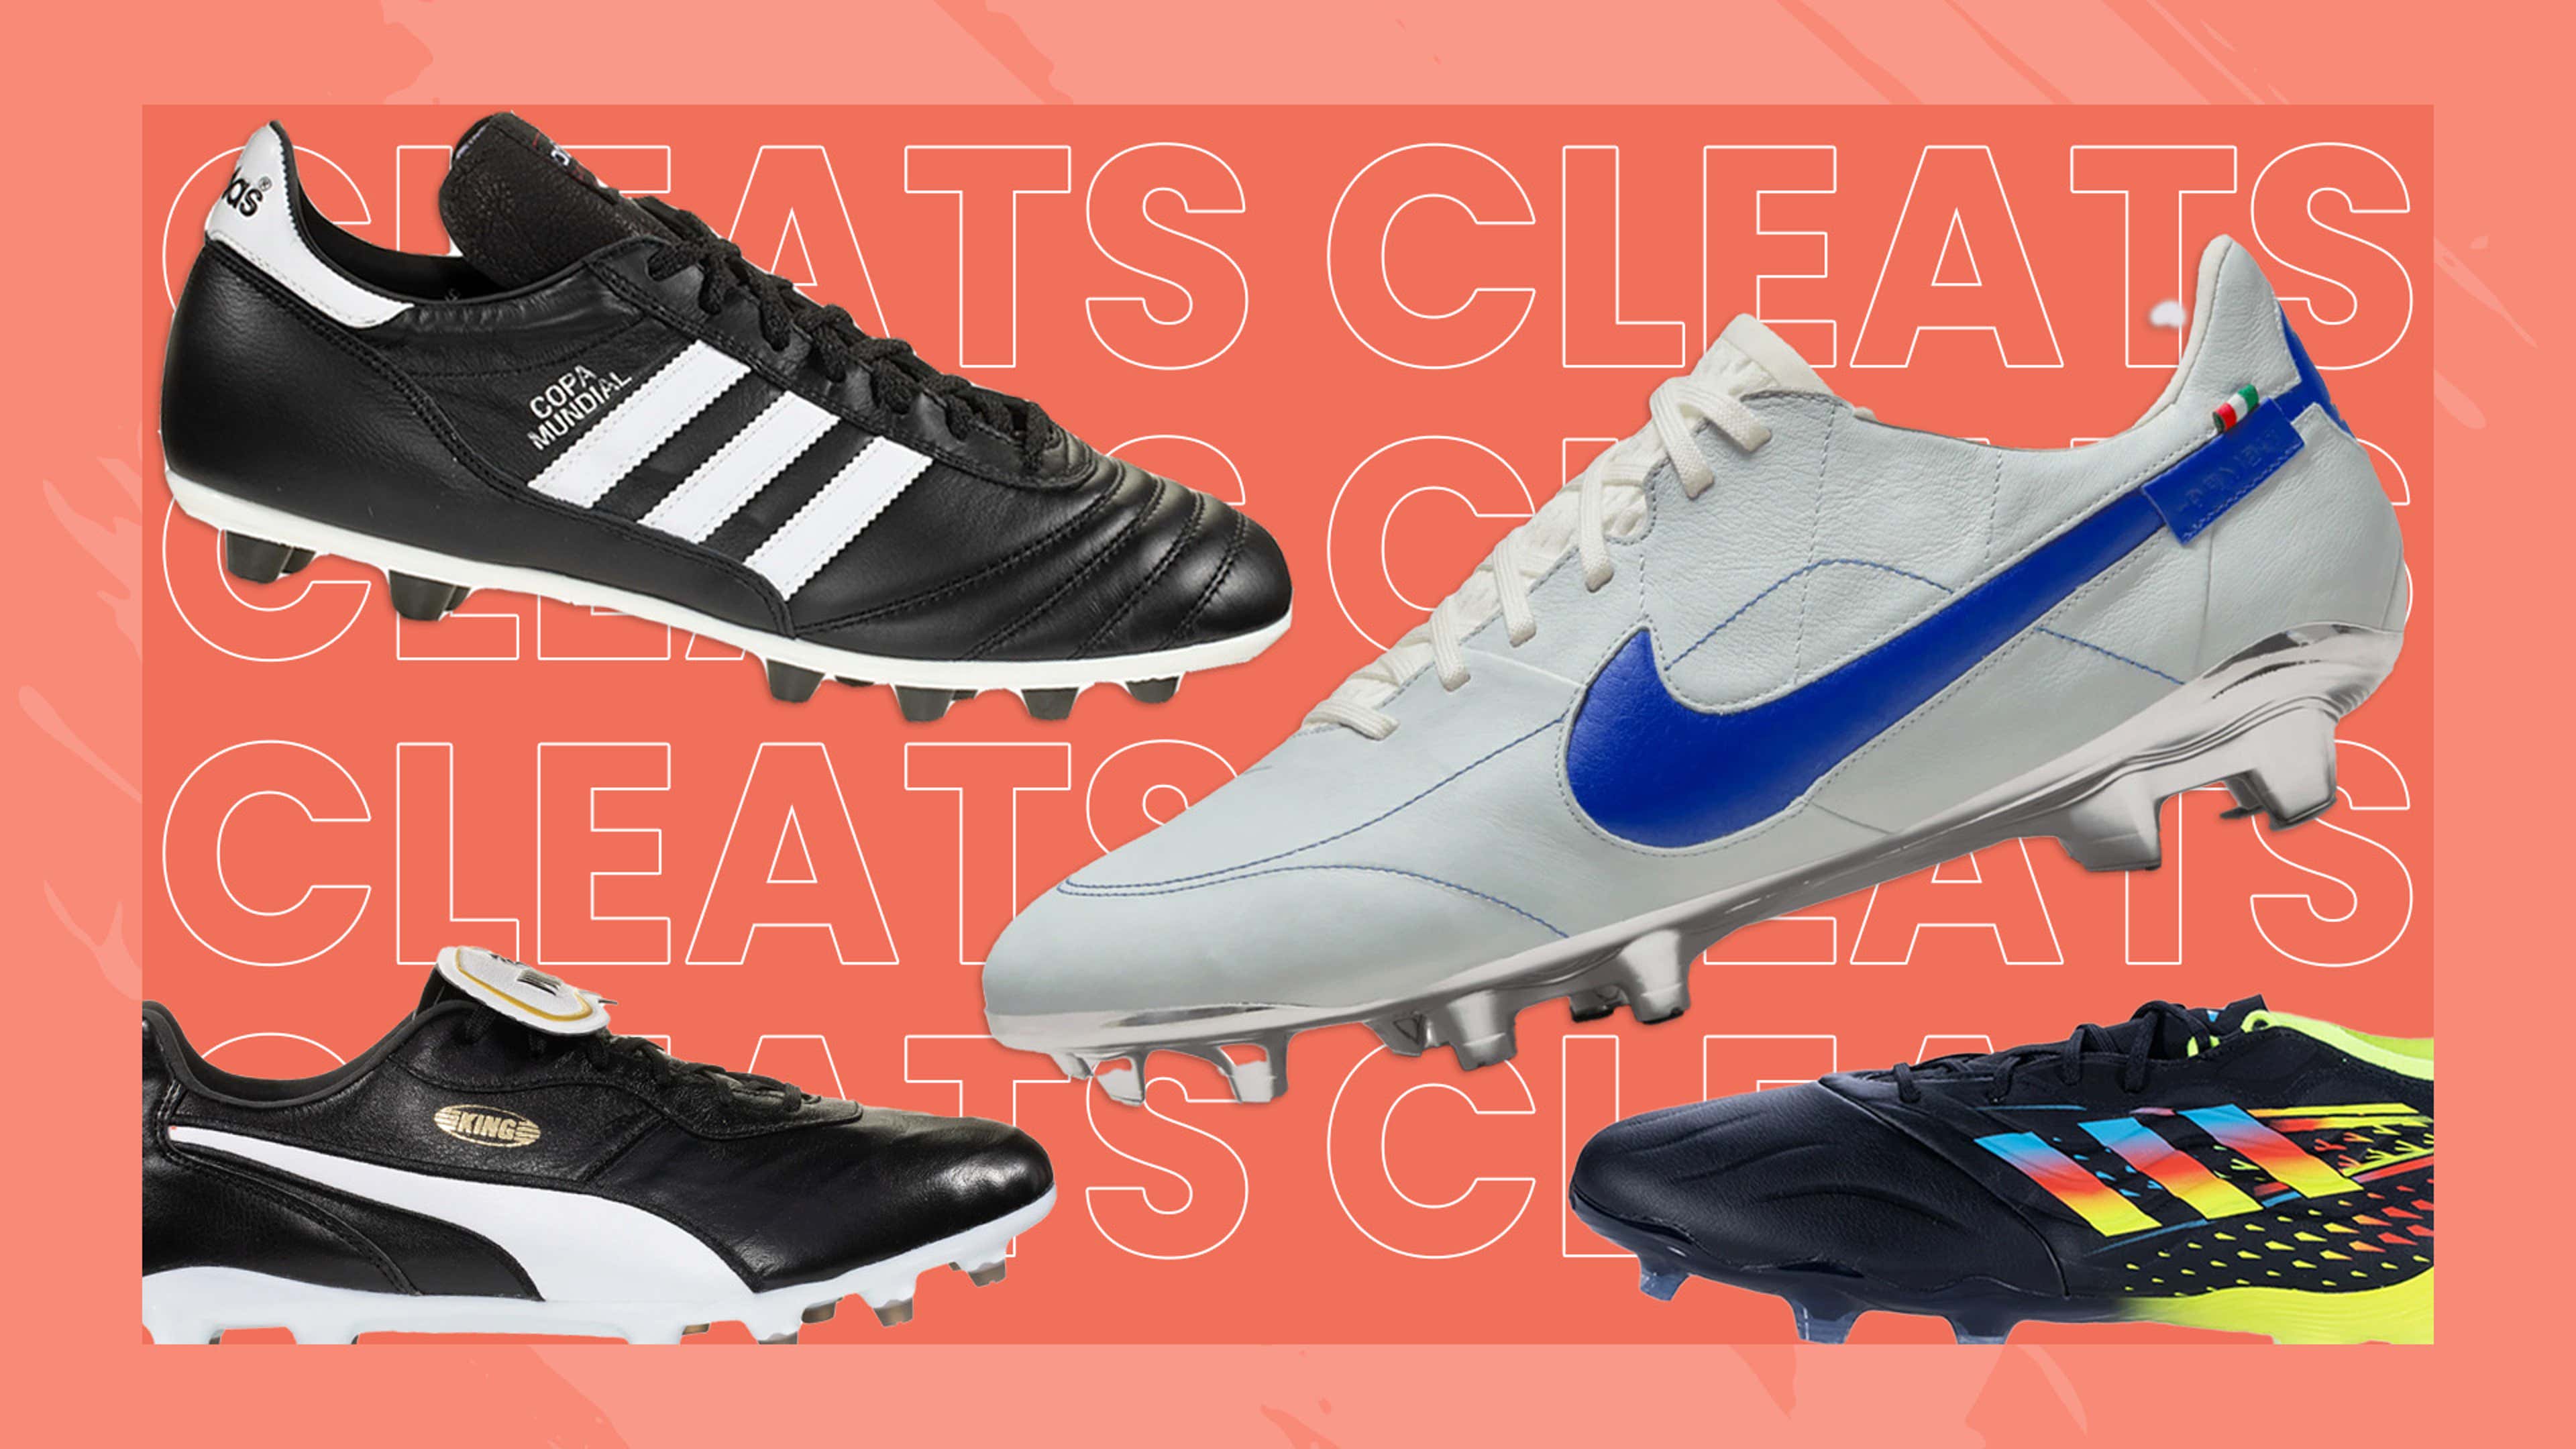 9 Best Football Boots for Astro Turf UK 2023, Nike, Adidas and More